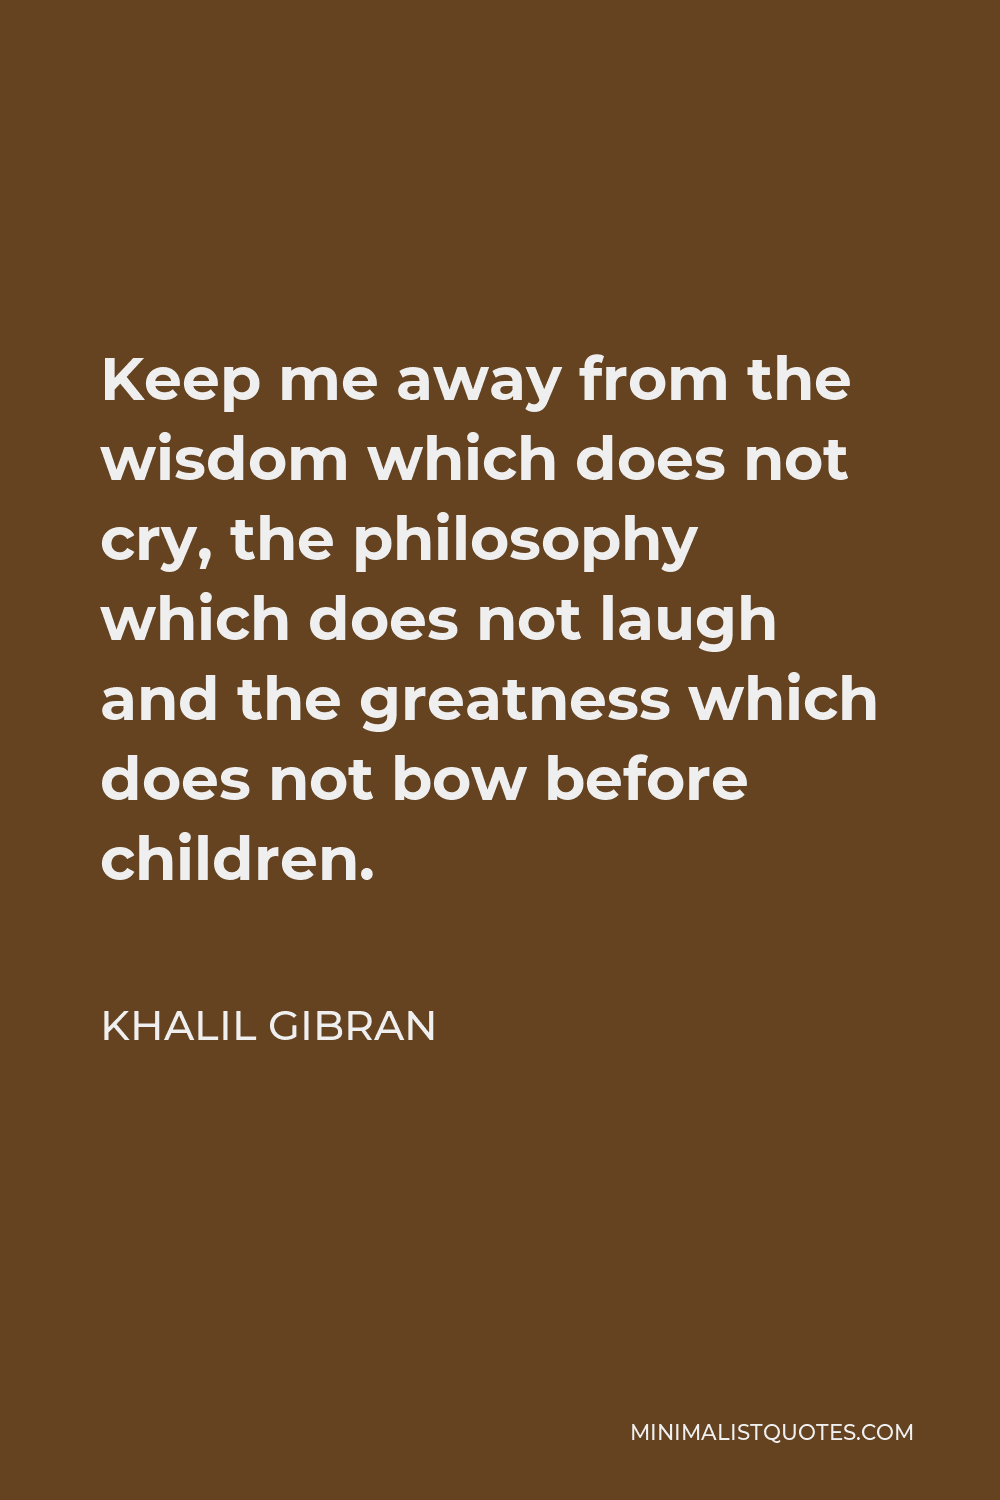 Khalil Gibran Quote - Keep me away from the wisdom which does not cry, the philosophy which does not laugh and the greatness which does not bow before children.